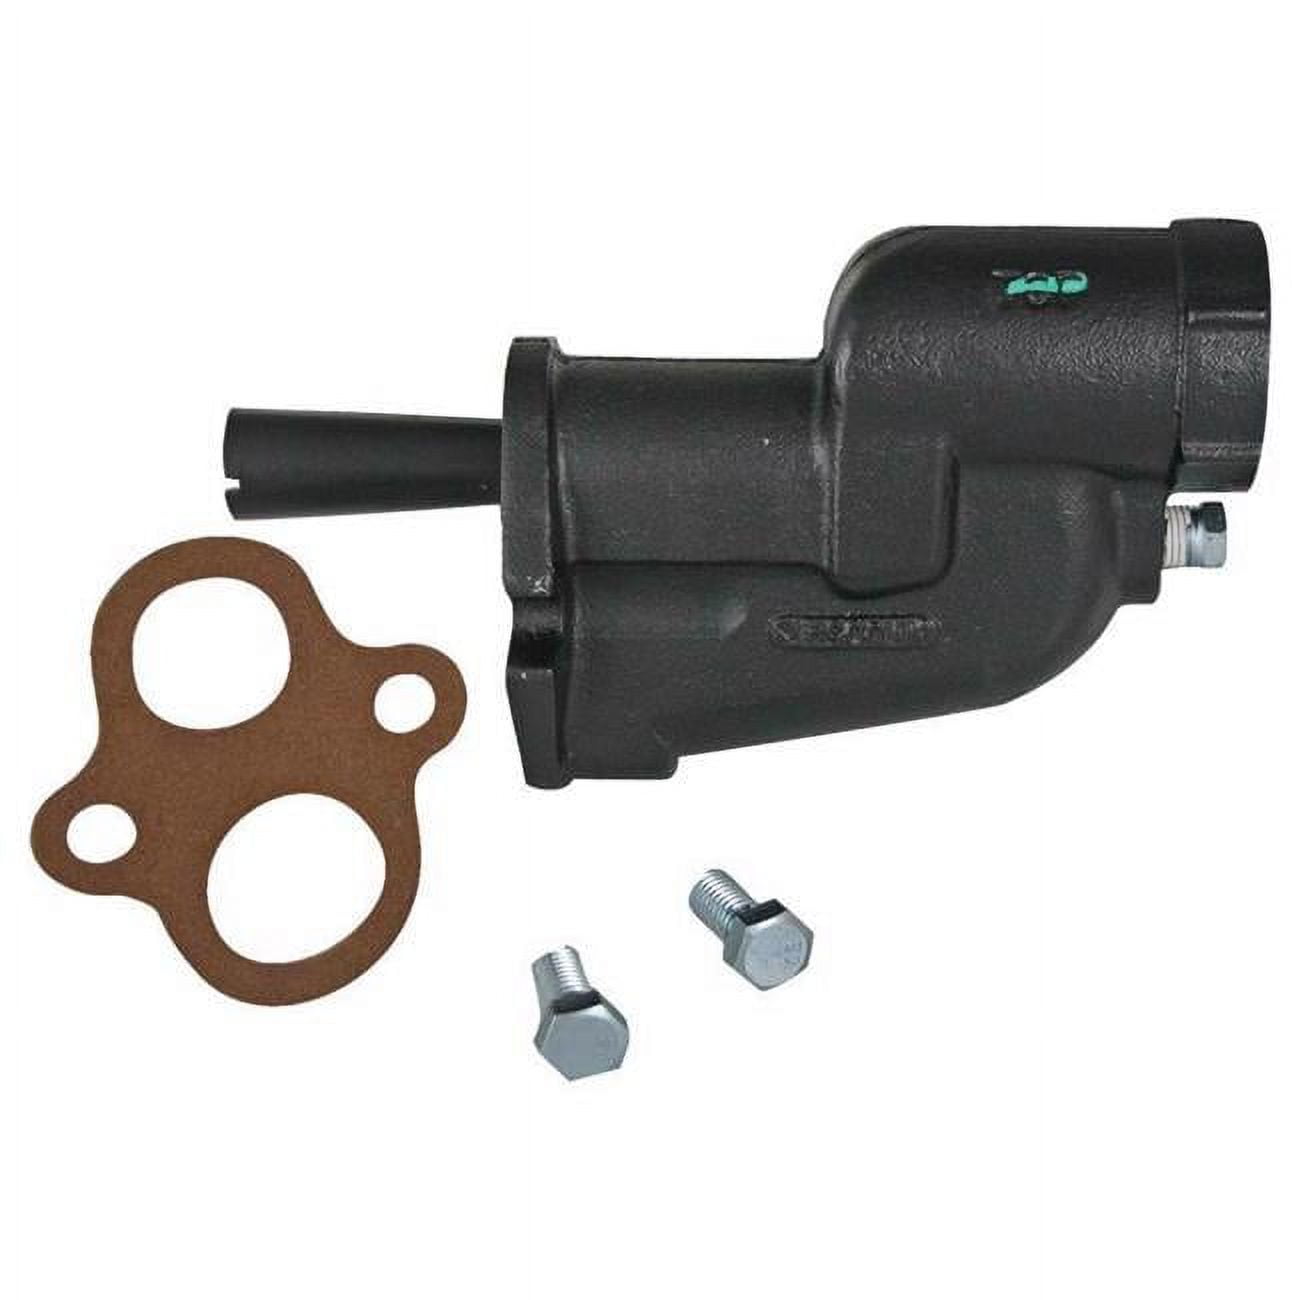 UPC 054757000592 product image for 4024268 0.5 HP 1400 GPH Cast Iron Shallow Jet Well Ejector | upcitemdb.com